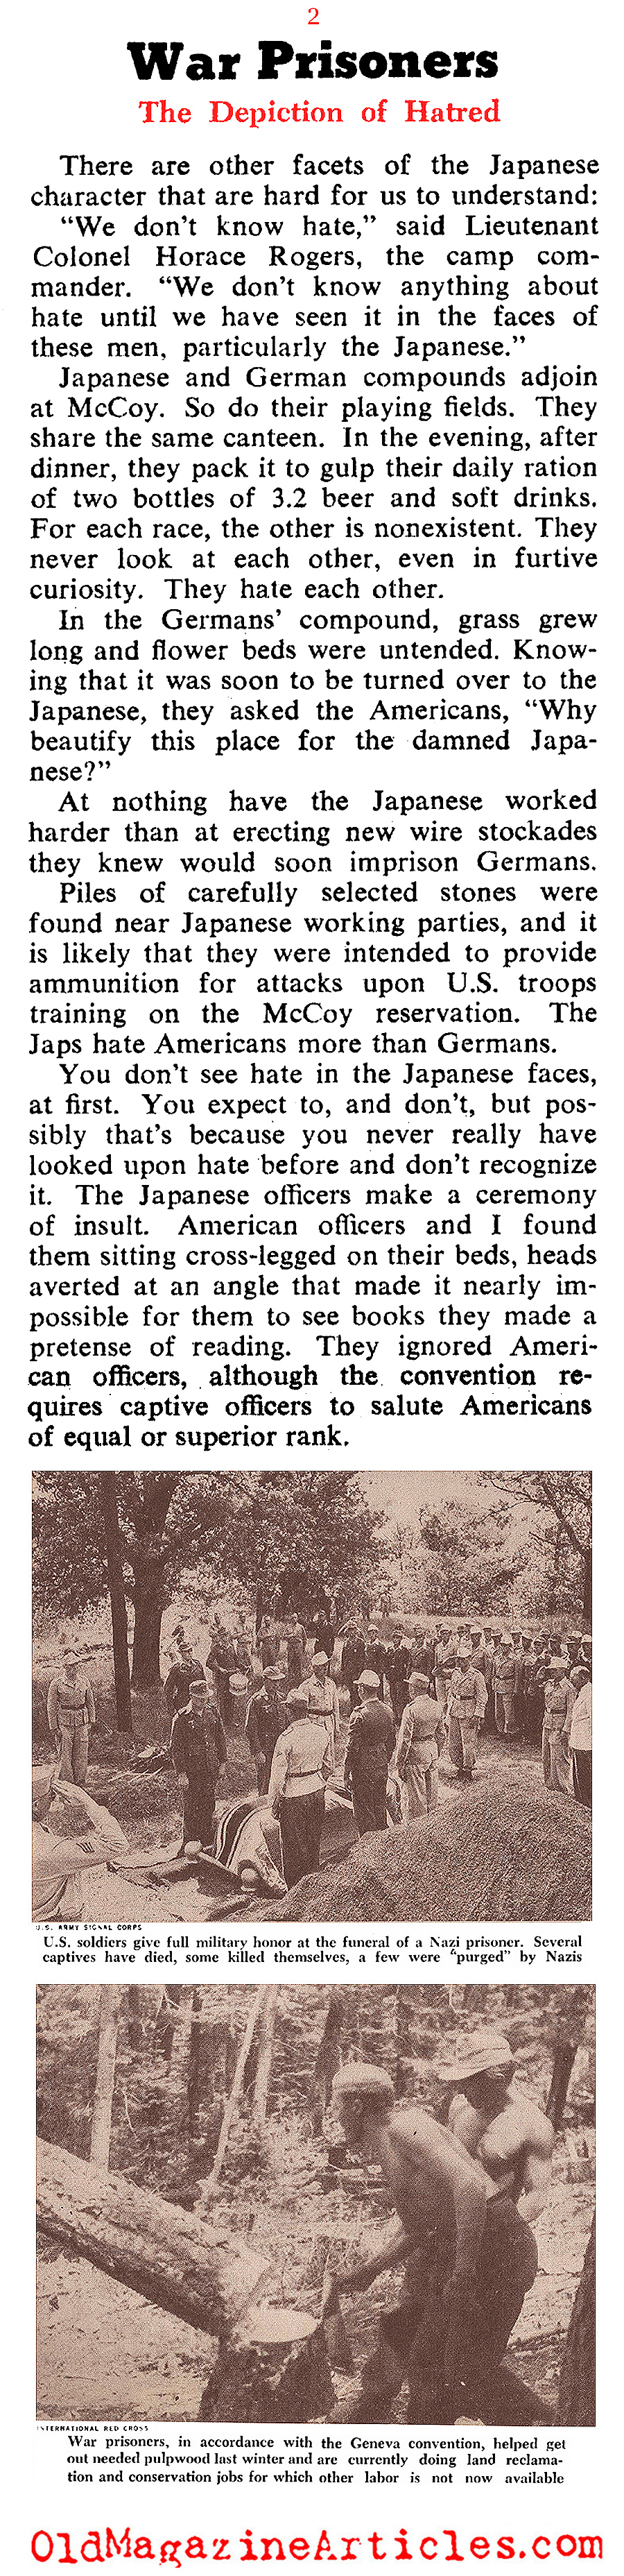 Japanese Prisoners at Camp McCoy (Collier's Magazine, 1944)